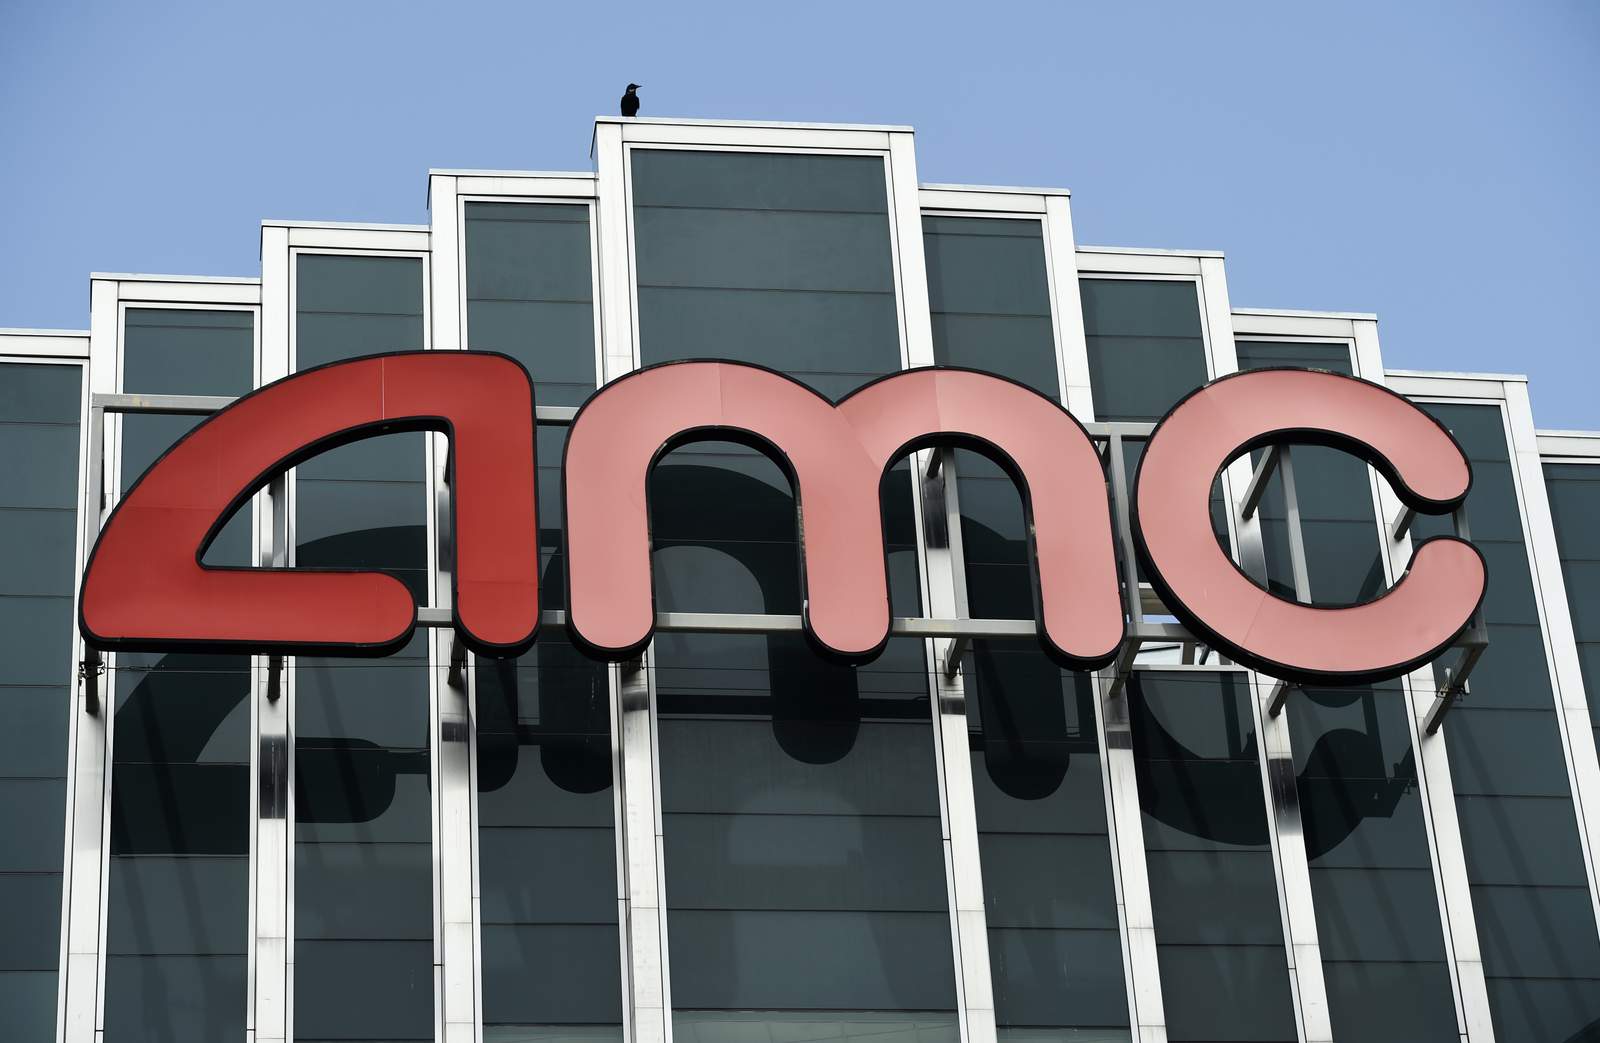 AMC pushes back movie theater reopening by 2 weeks